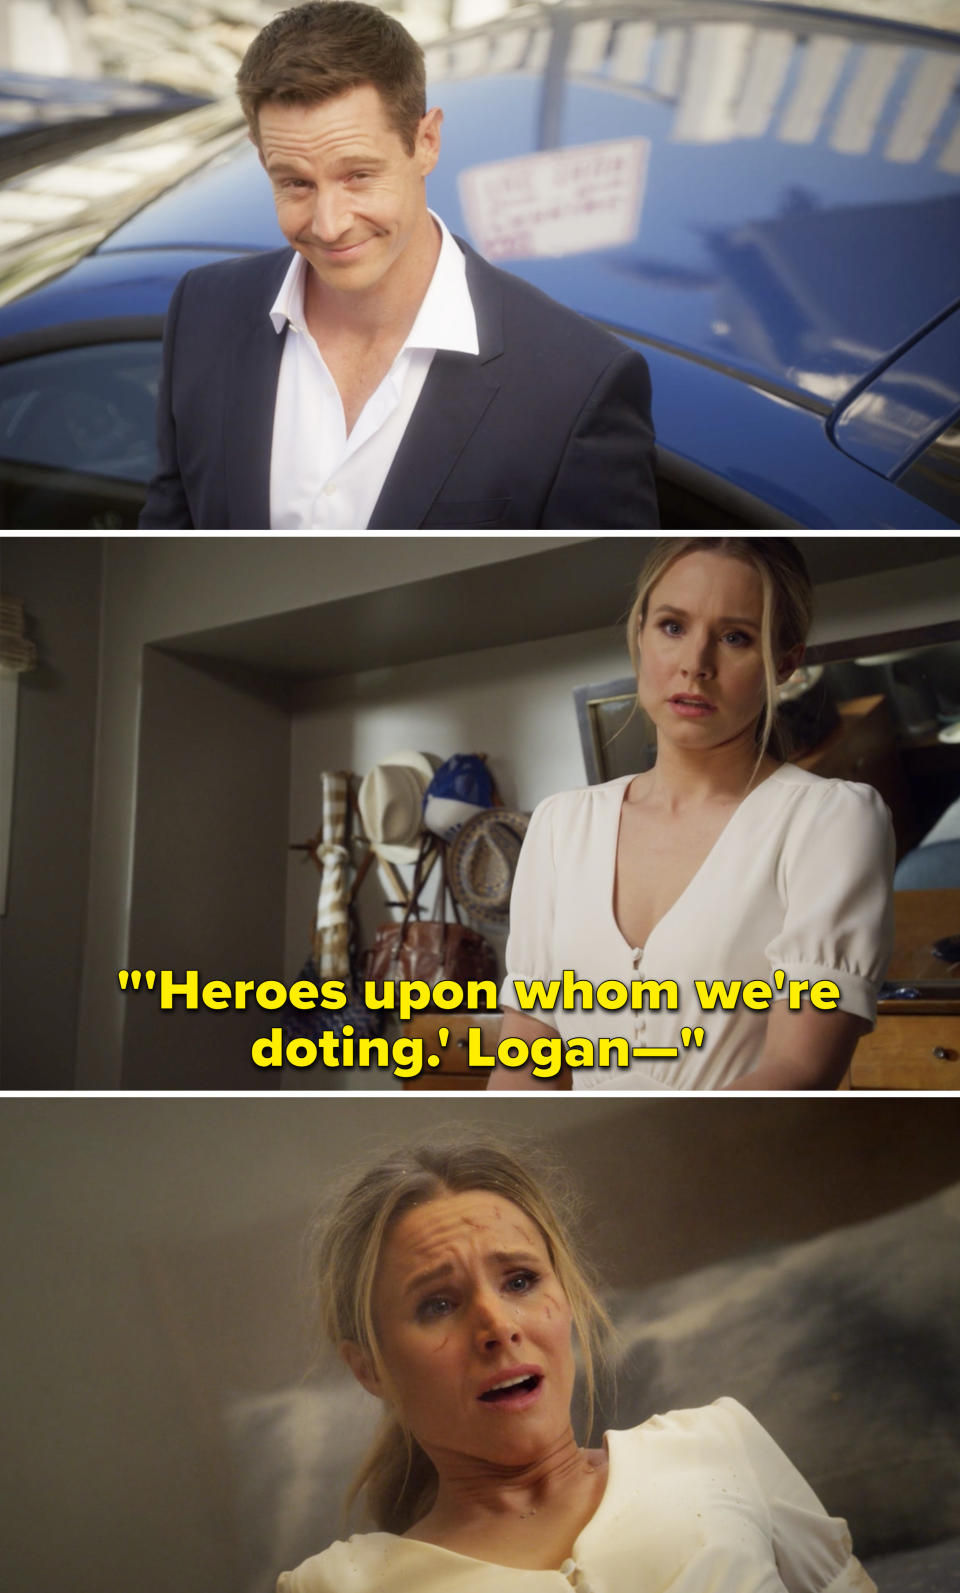 Veronica saying, "Heroes upon whom we're doting. Logan" before looking shocked after an explosion